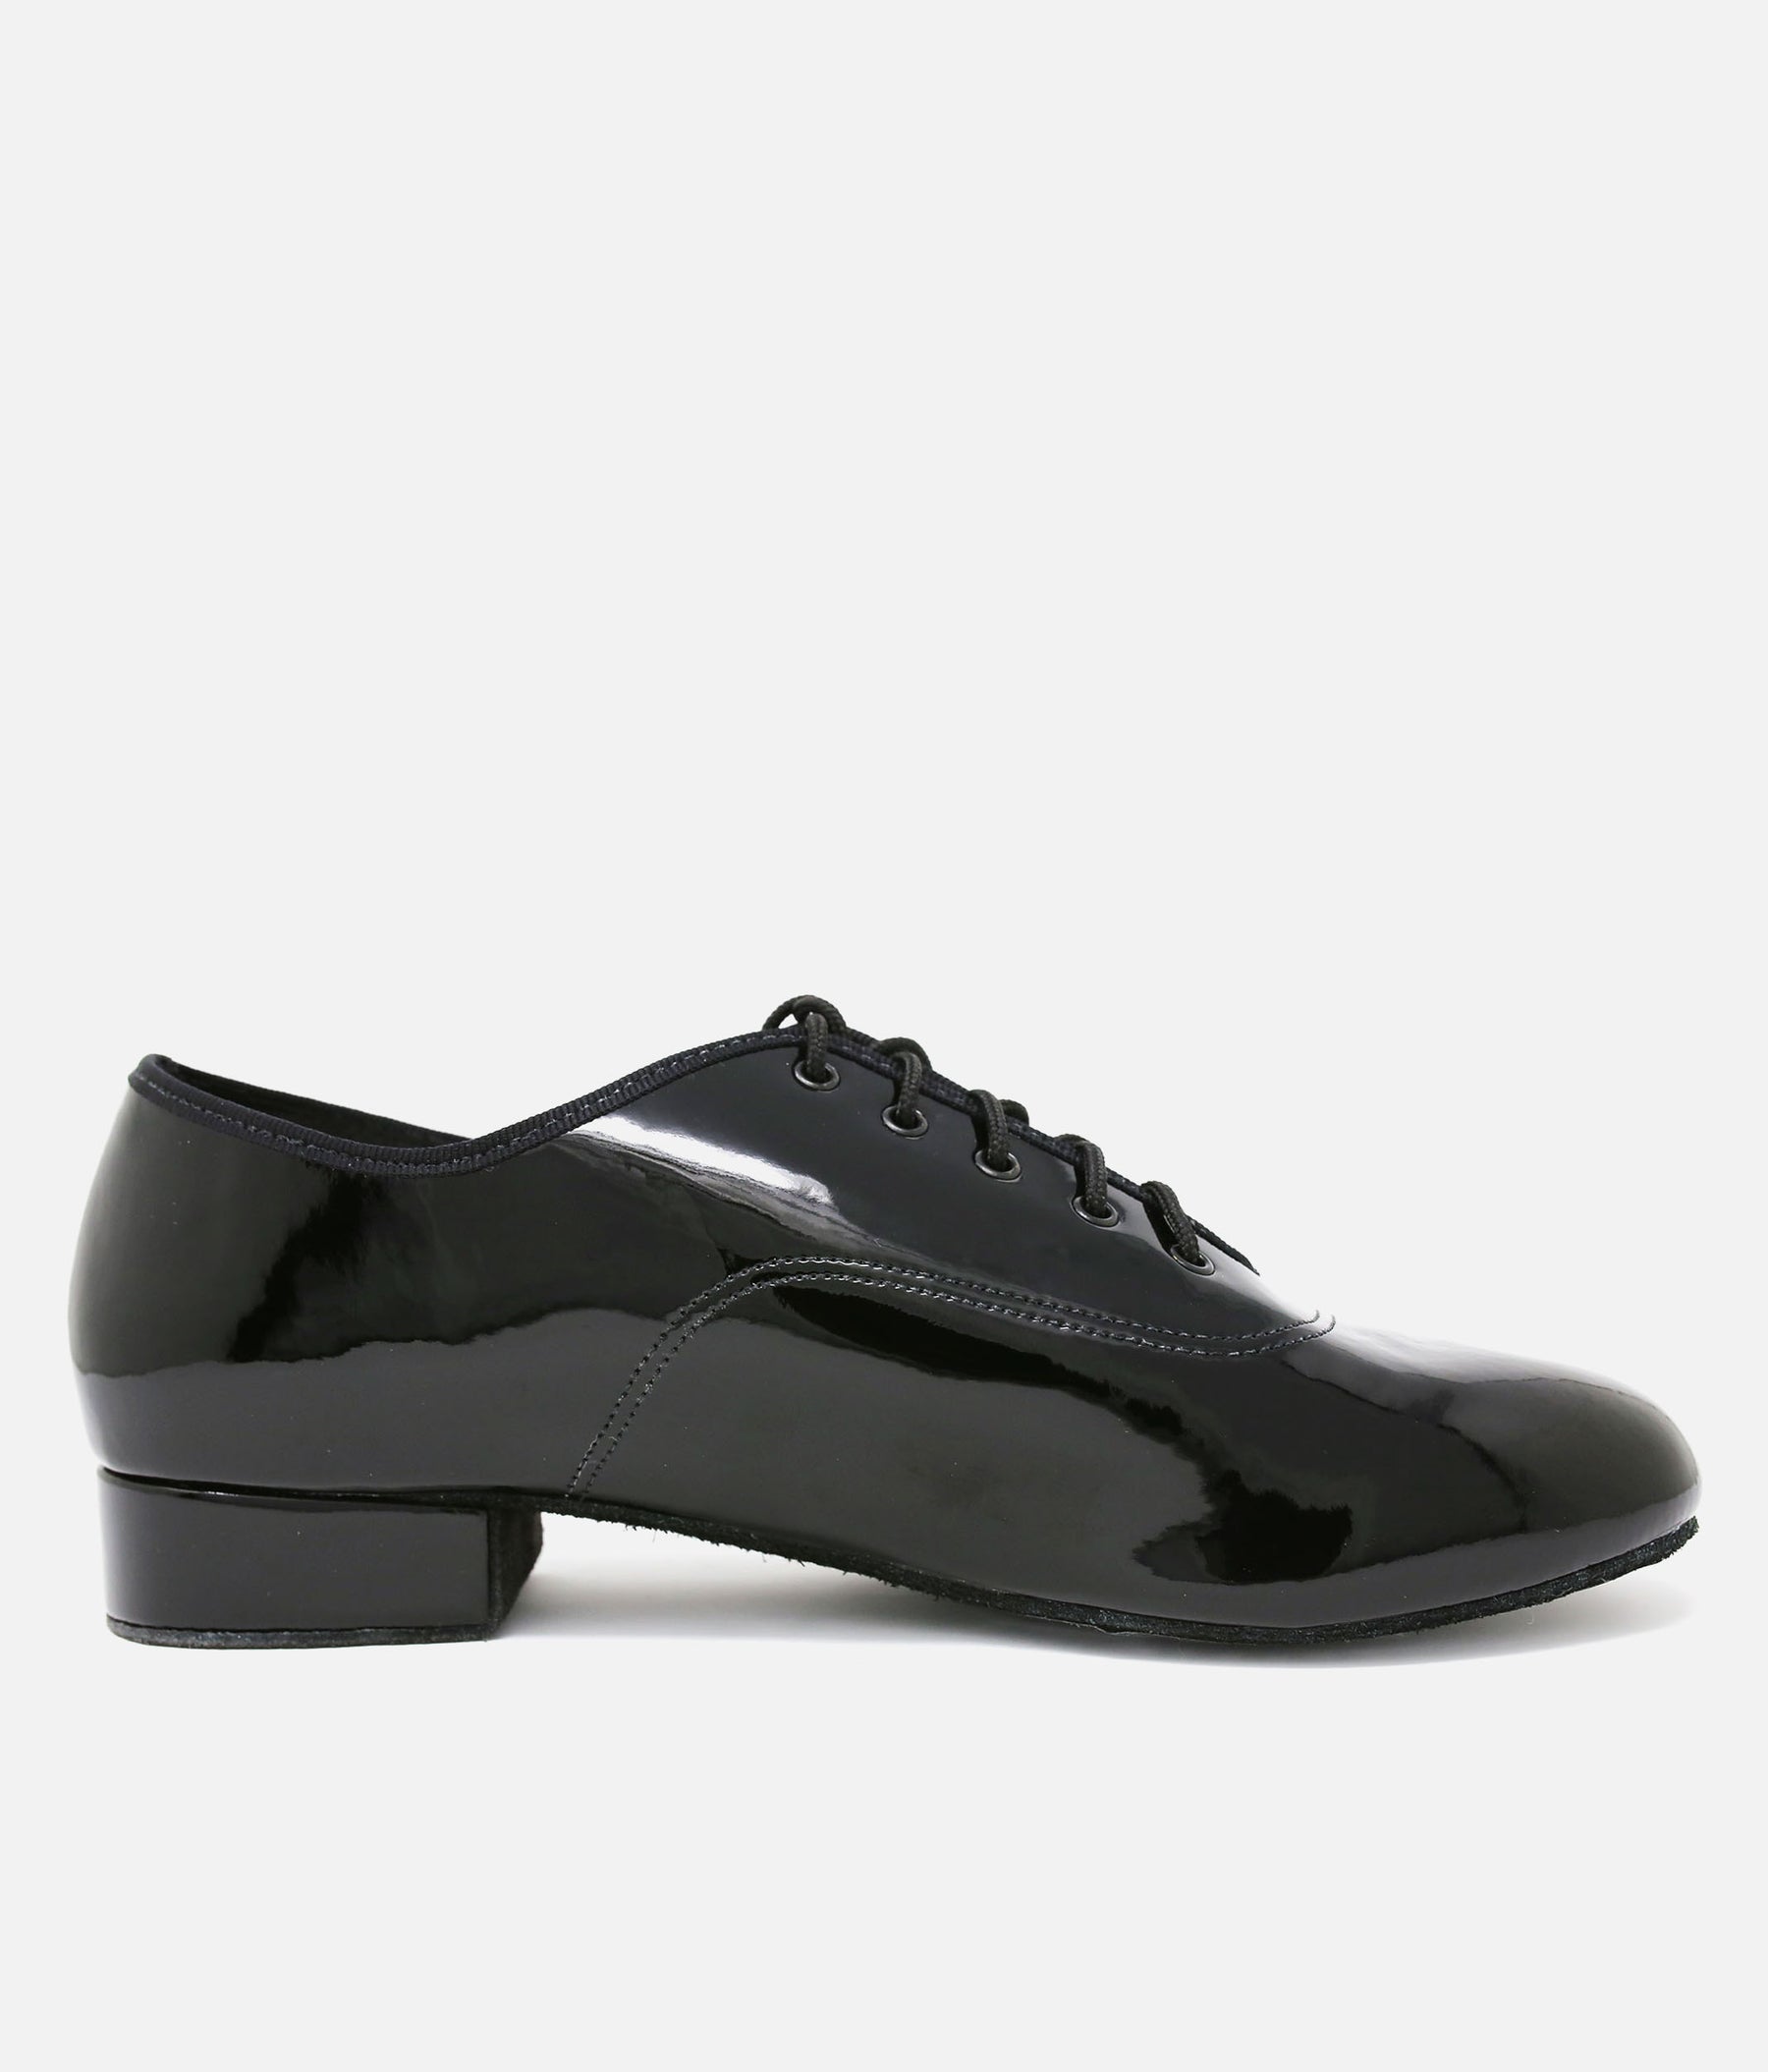 Oxford Style Patent Leather Ballroom Shoe - 6692P